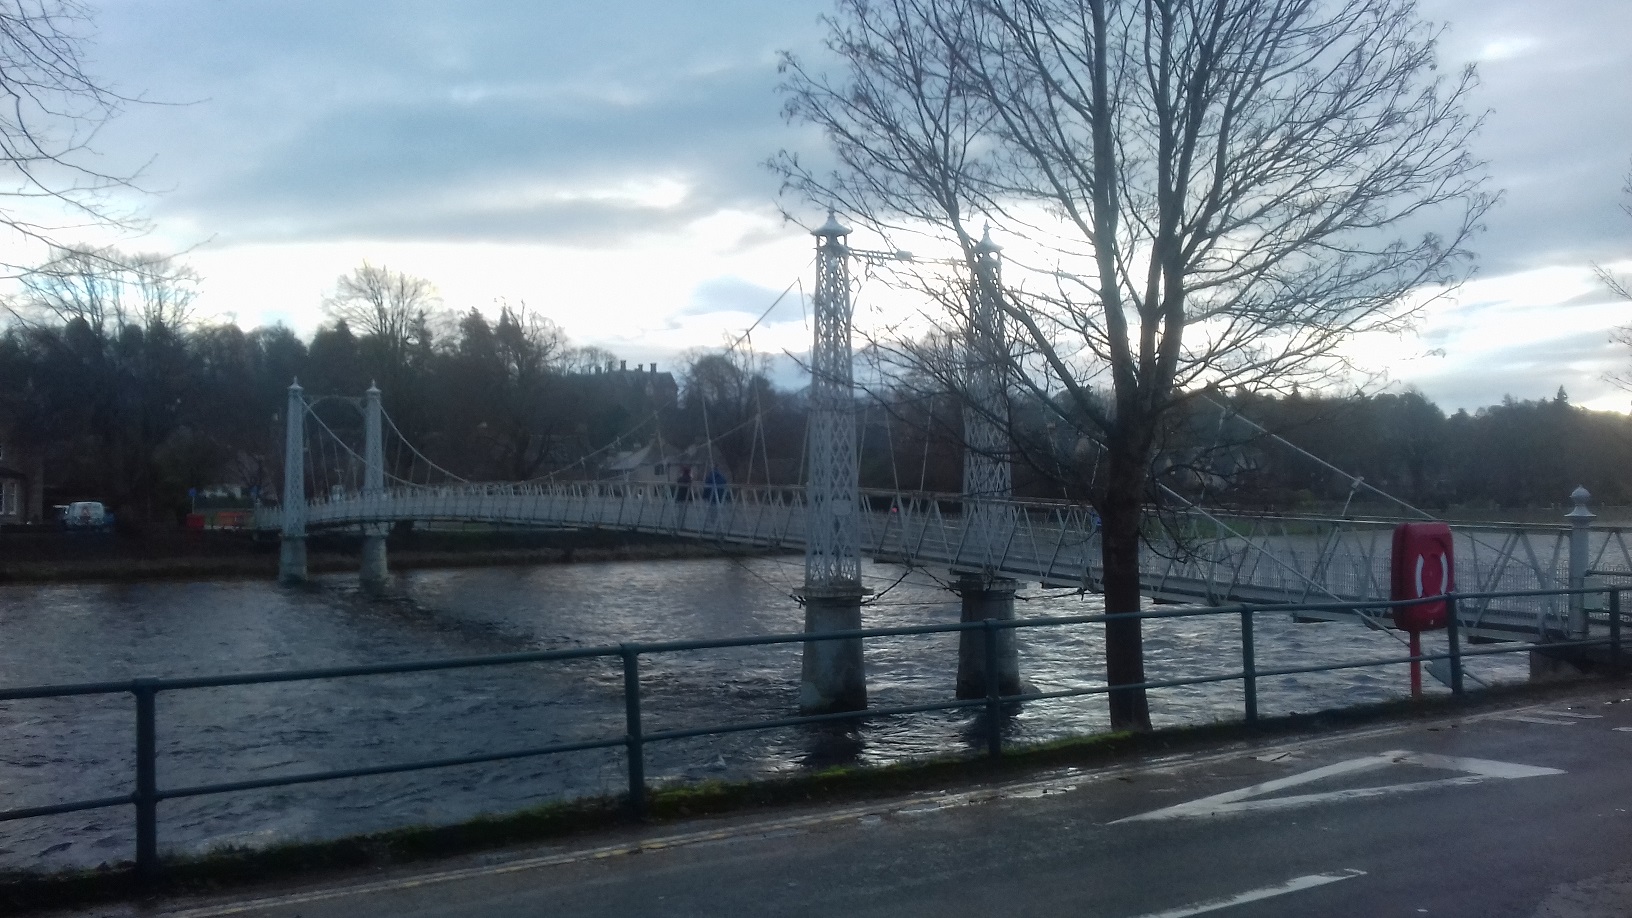 Infirmary Bridge in Inverness reopens after delayed interim repairs